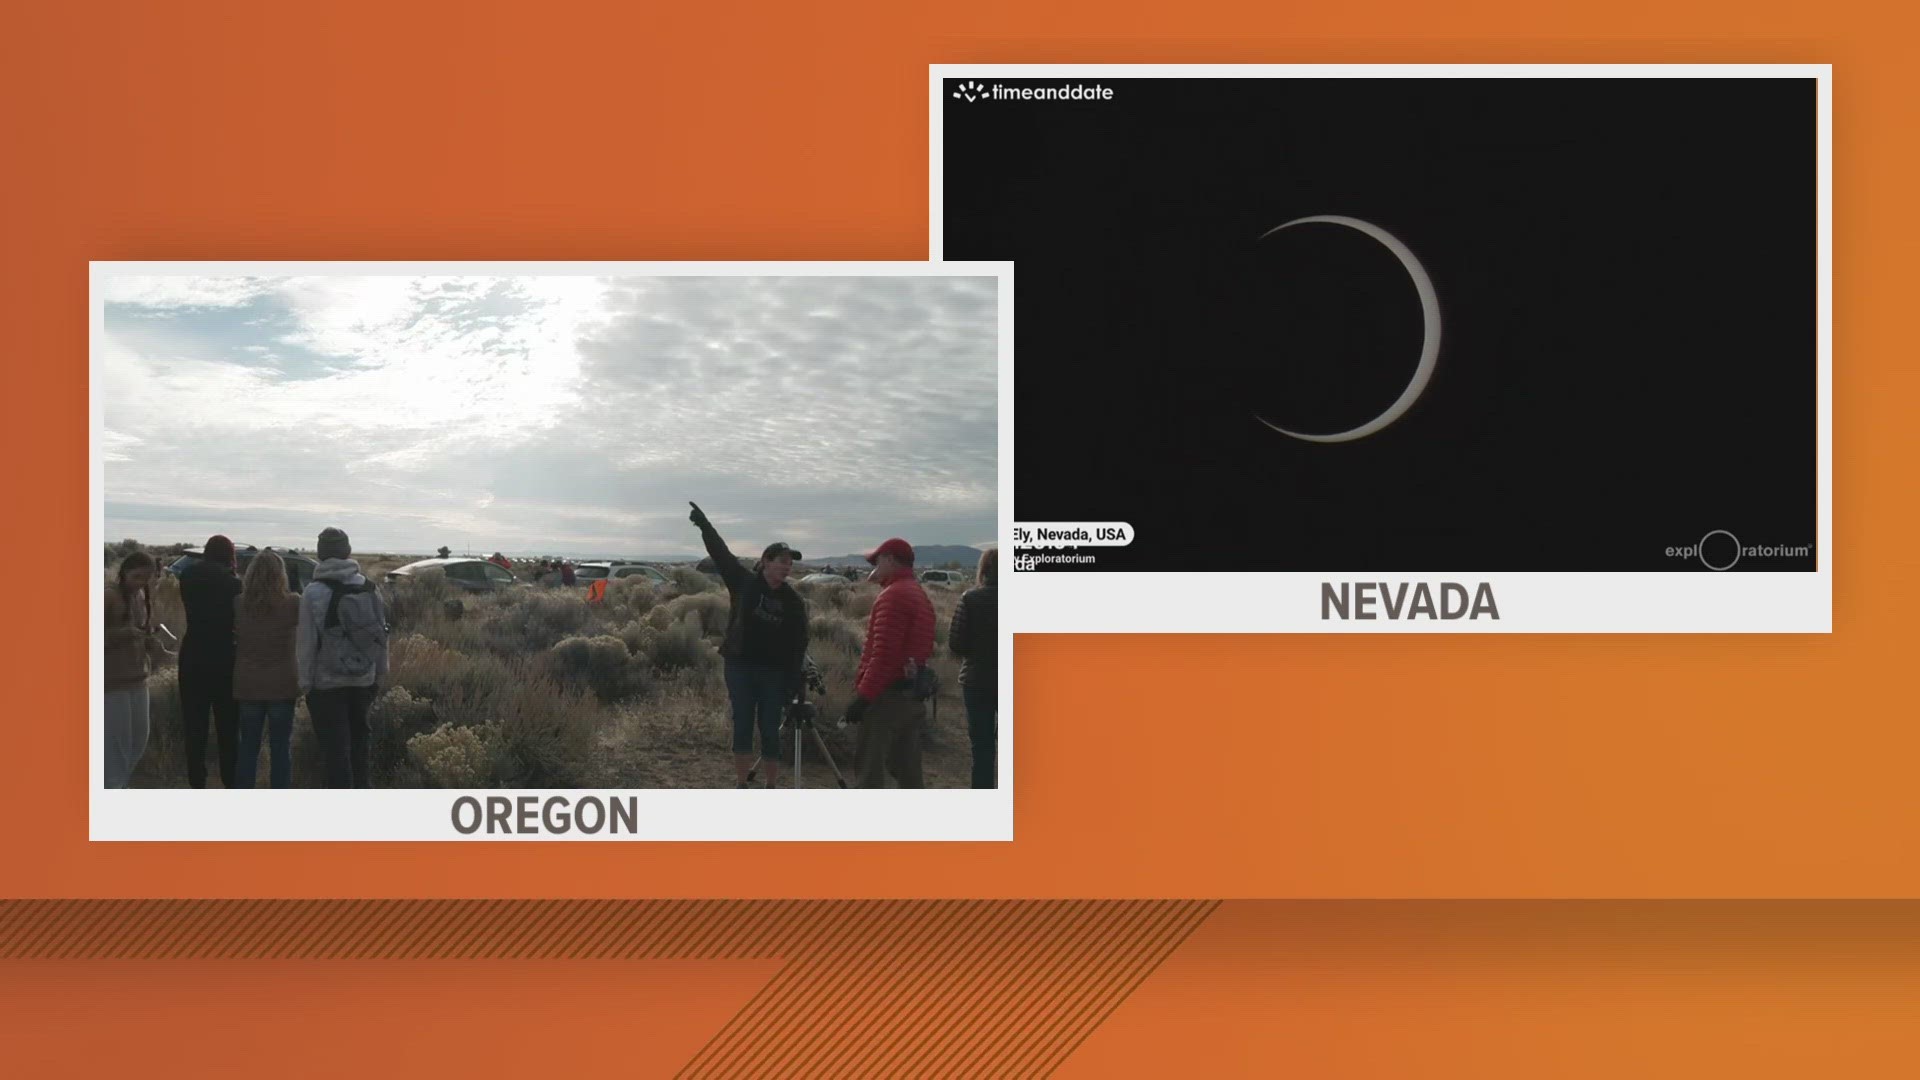 KING 5 sent a crew to La Pine, Oregon to get reactions from visitors hoping to see the annular solar eclipse.